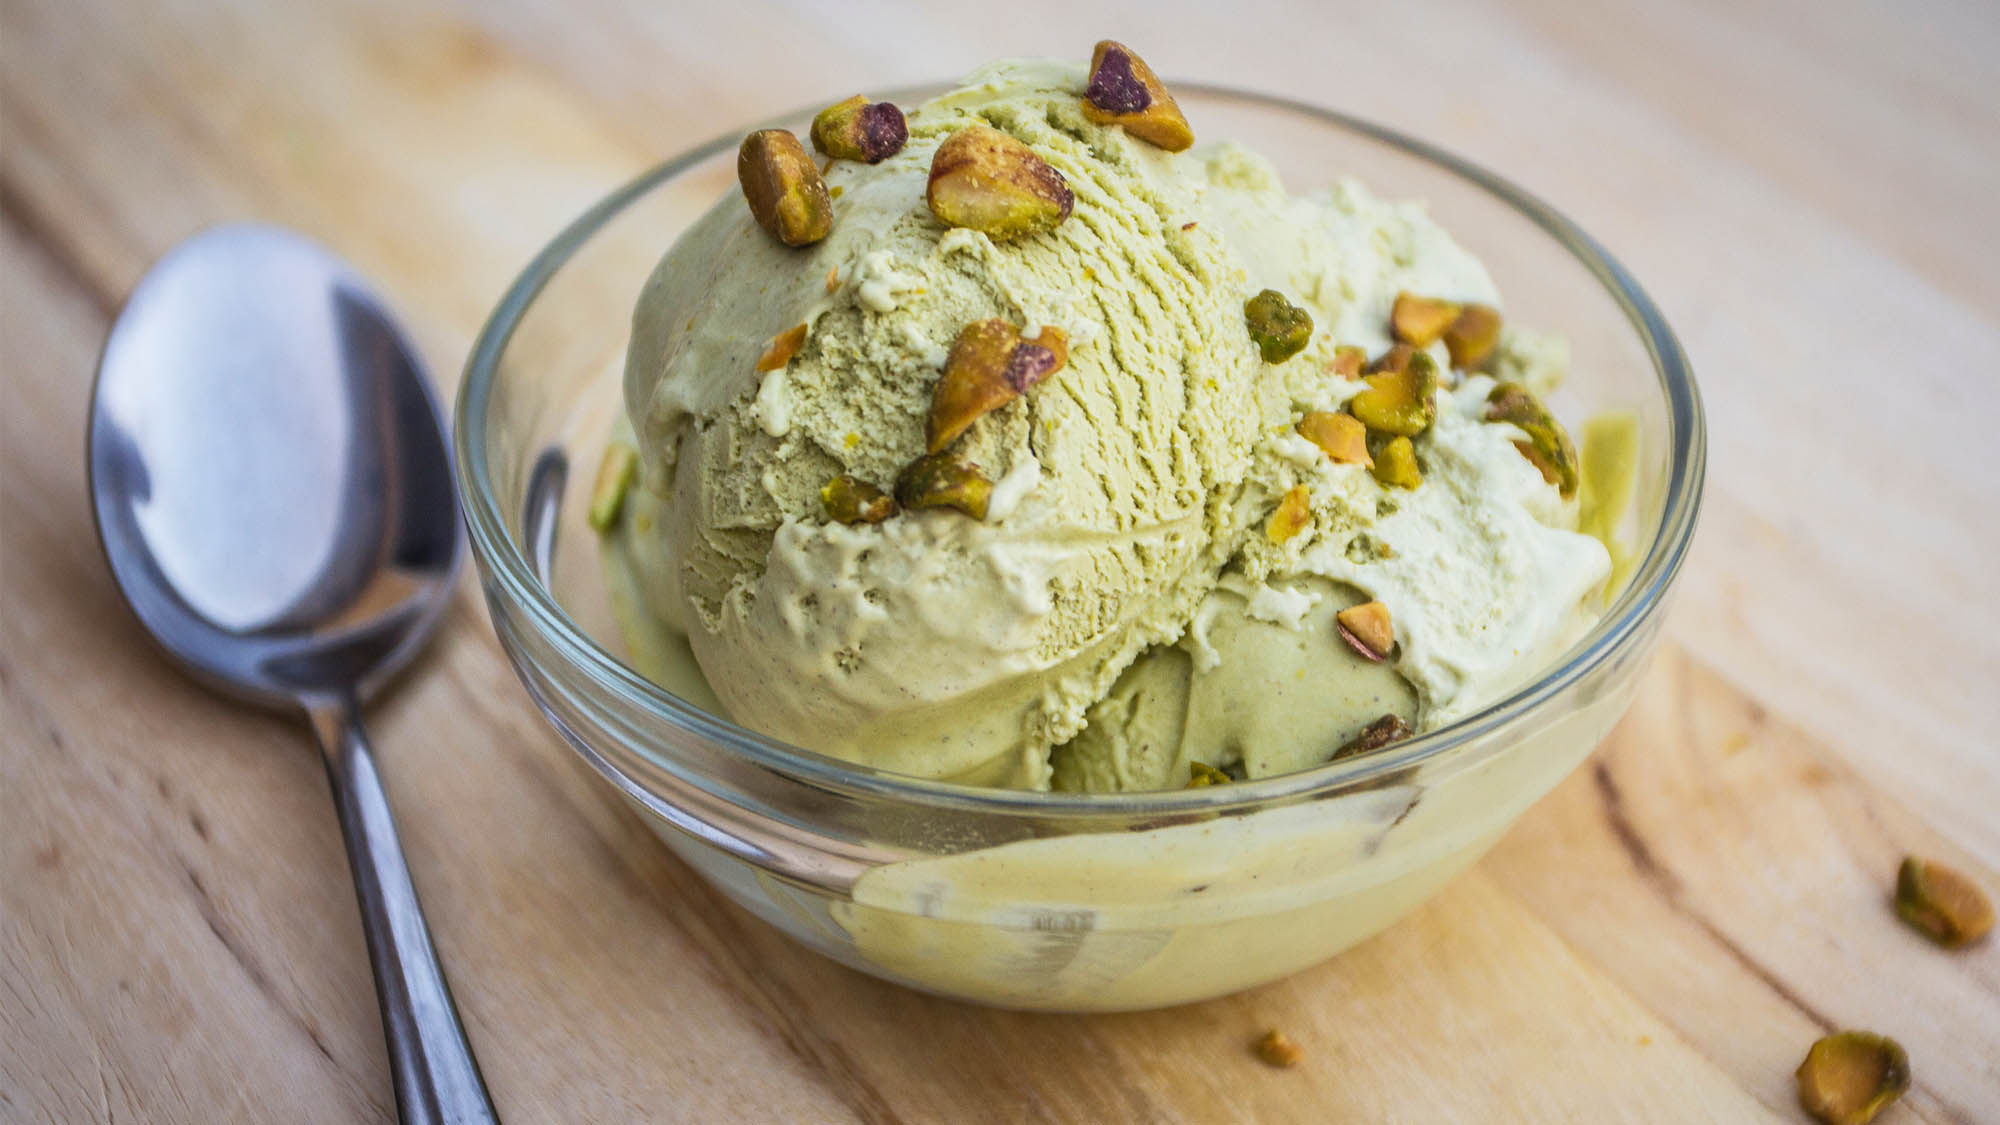 Clear glass dish of pistachio ice cream with spoon resting beside it on wood table